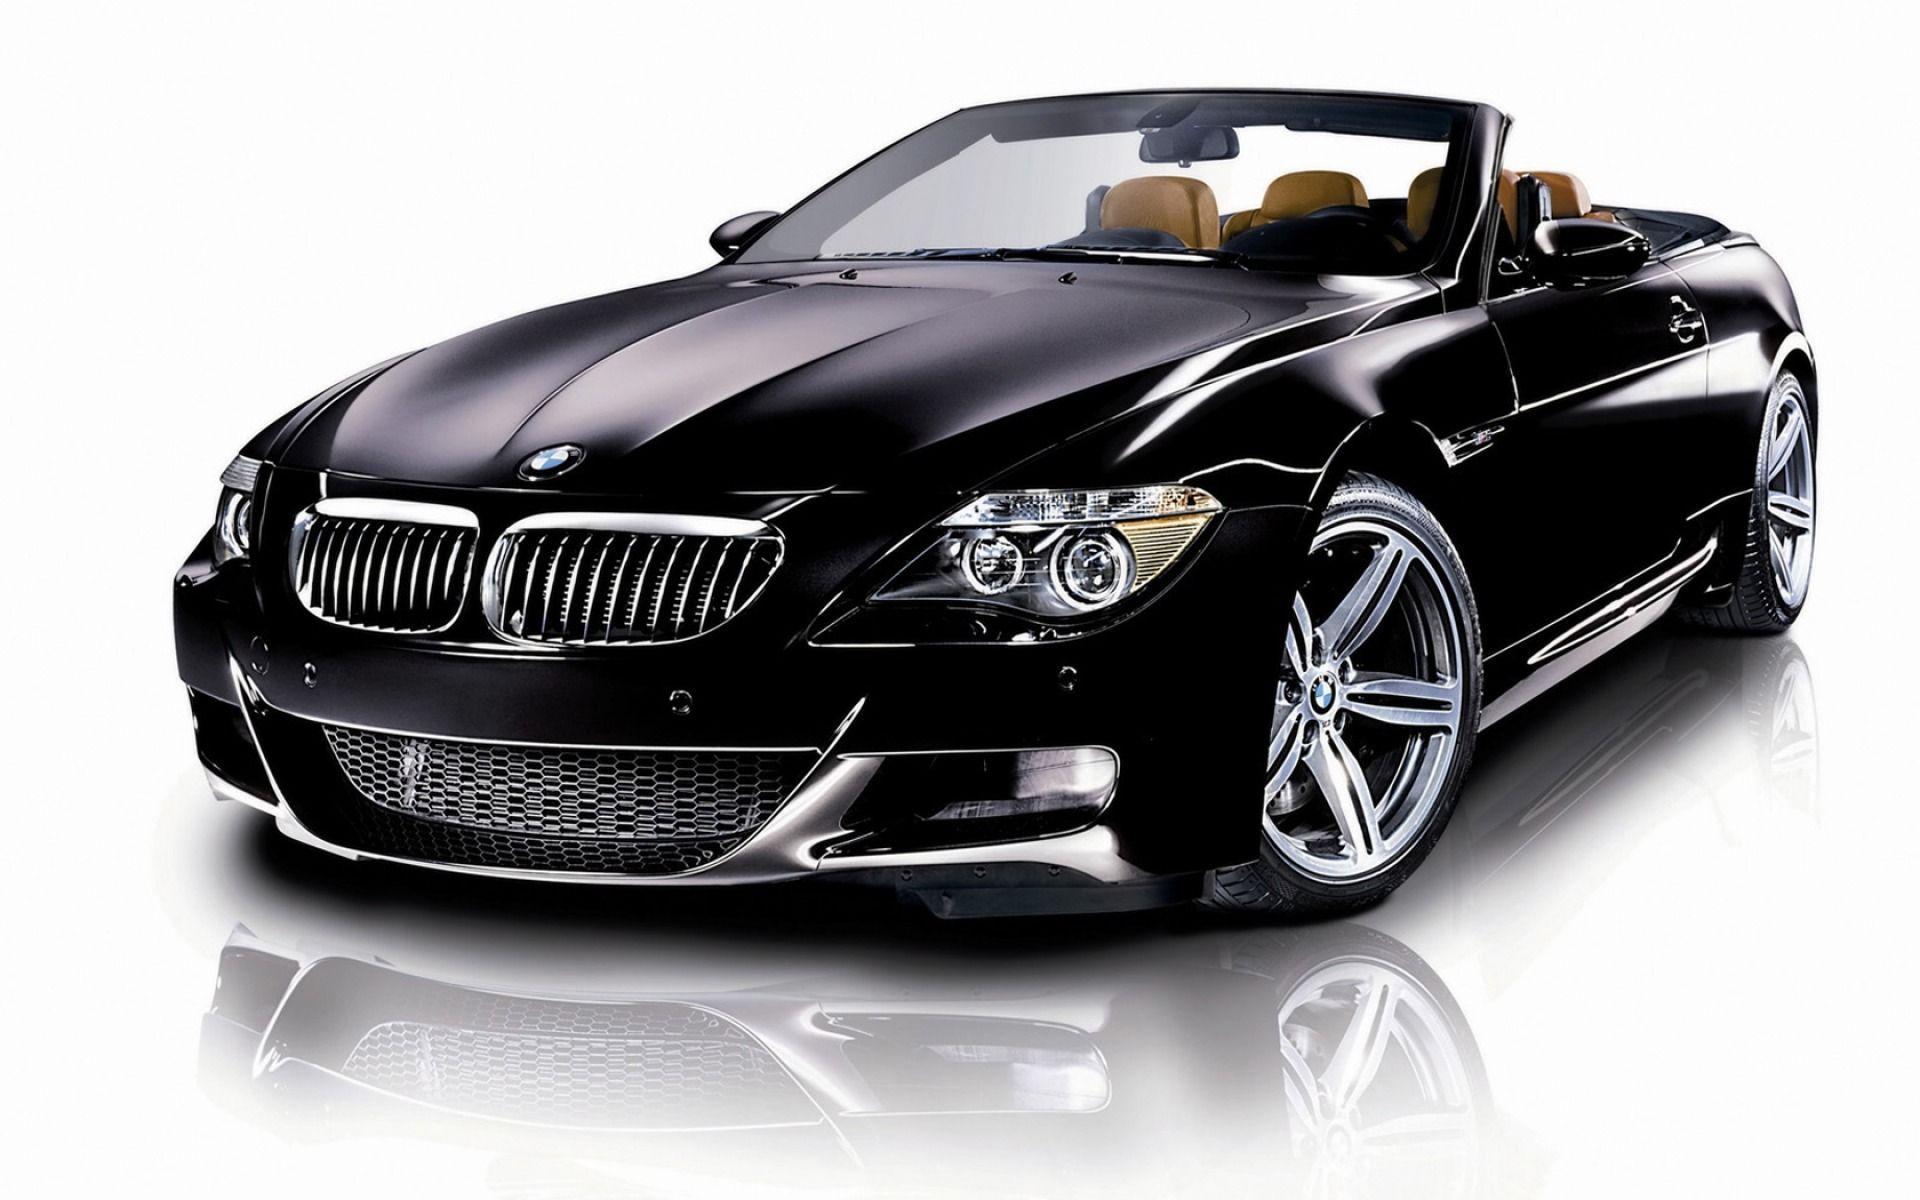 Featured image of post Background Editing Picsart Car Bmw Wallpaper Hd - All new car background hd collection for editing like picsart editing and photoshop edit hd quality and high pixels download here car background dosto aap log in sabhi backgrounds ko hd quality me ek ek kar ke download kar sakte iske liye sabhi backgrounds ke niche download ka.